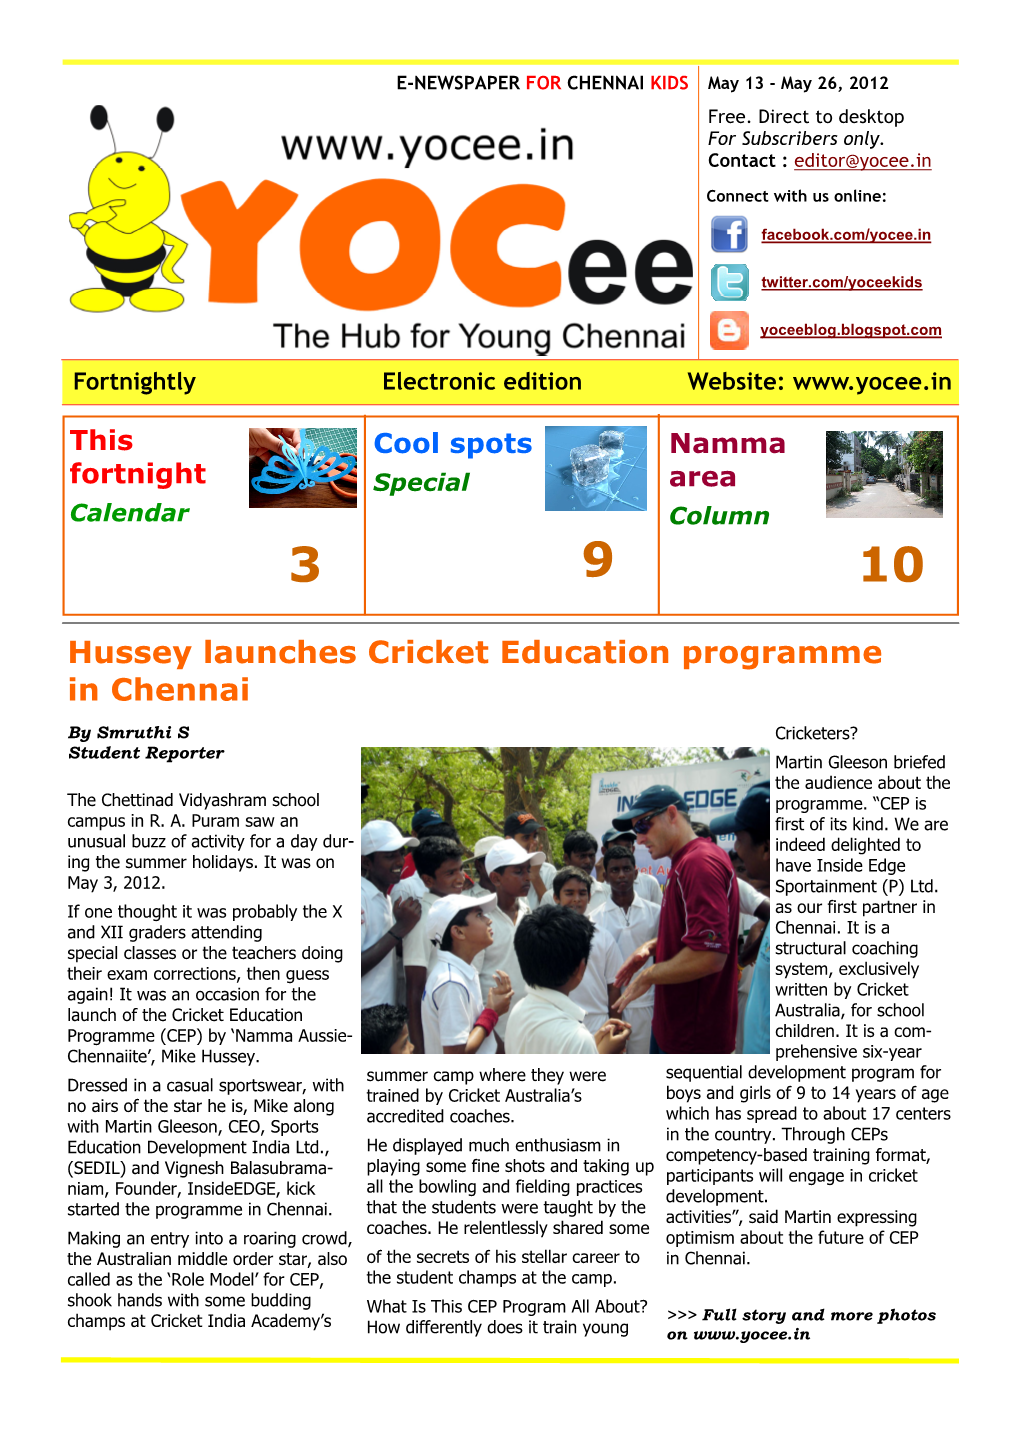 Hussey Launches Cricket Education Programme in Chennai